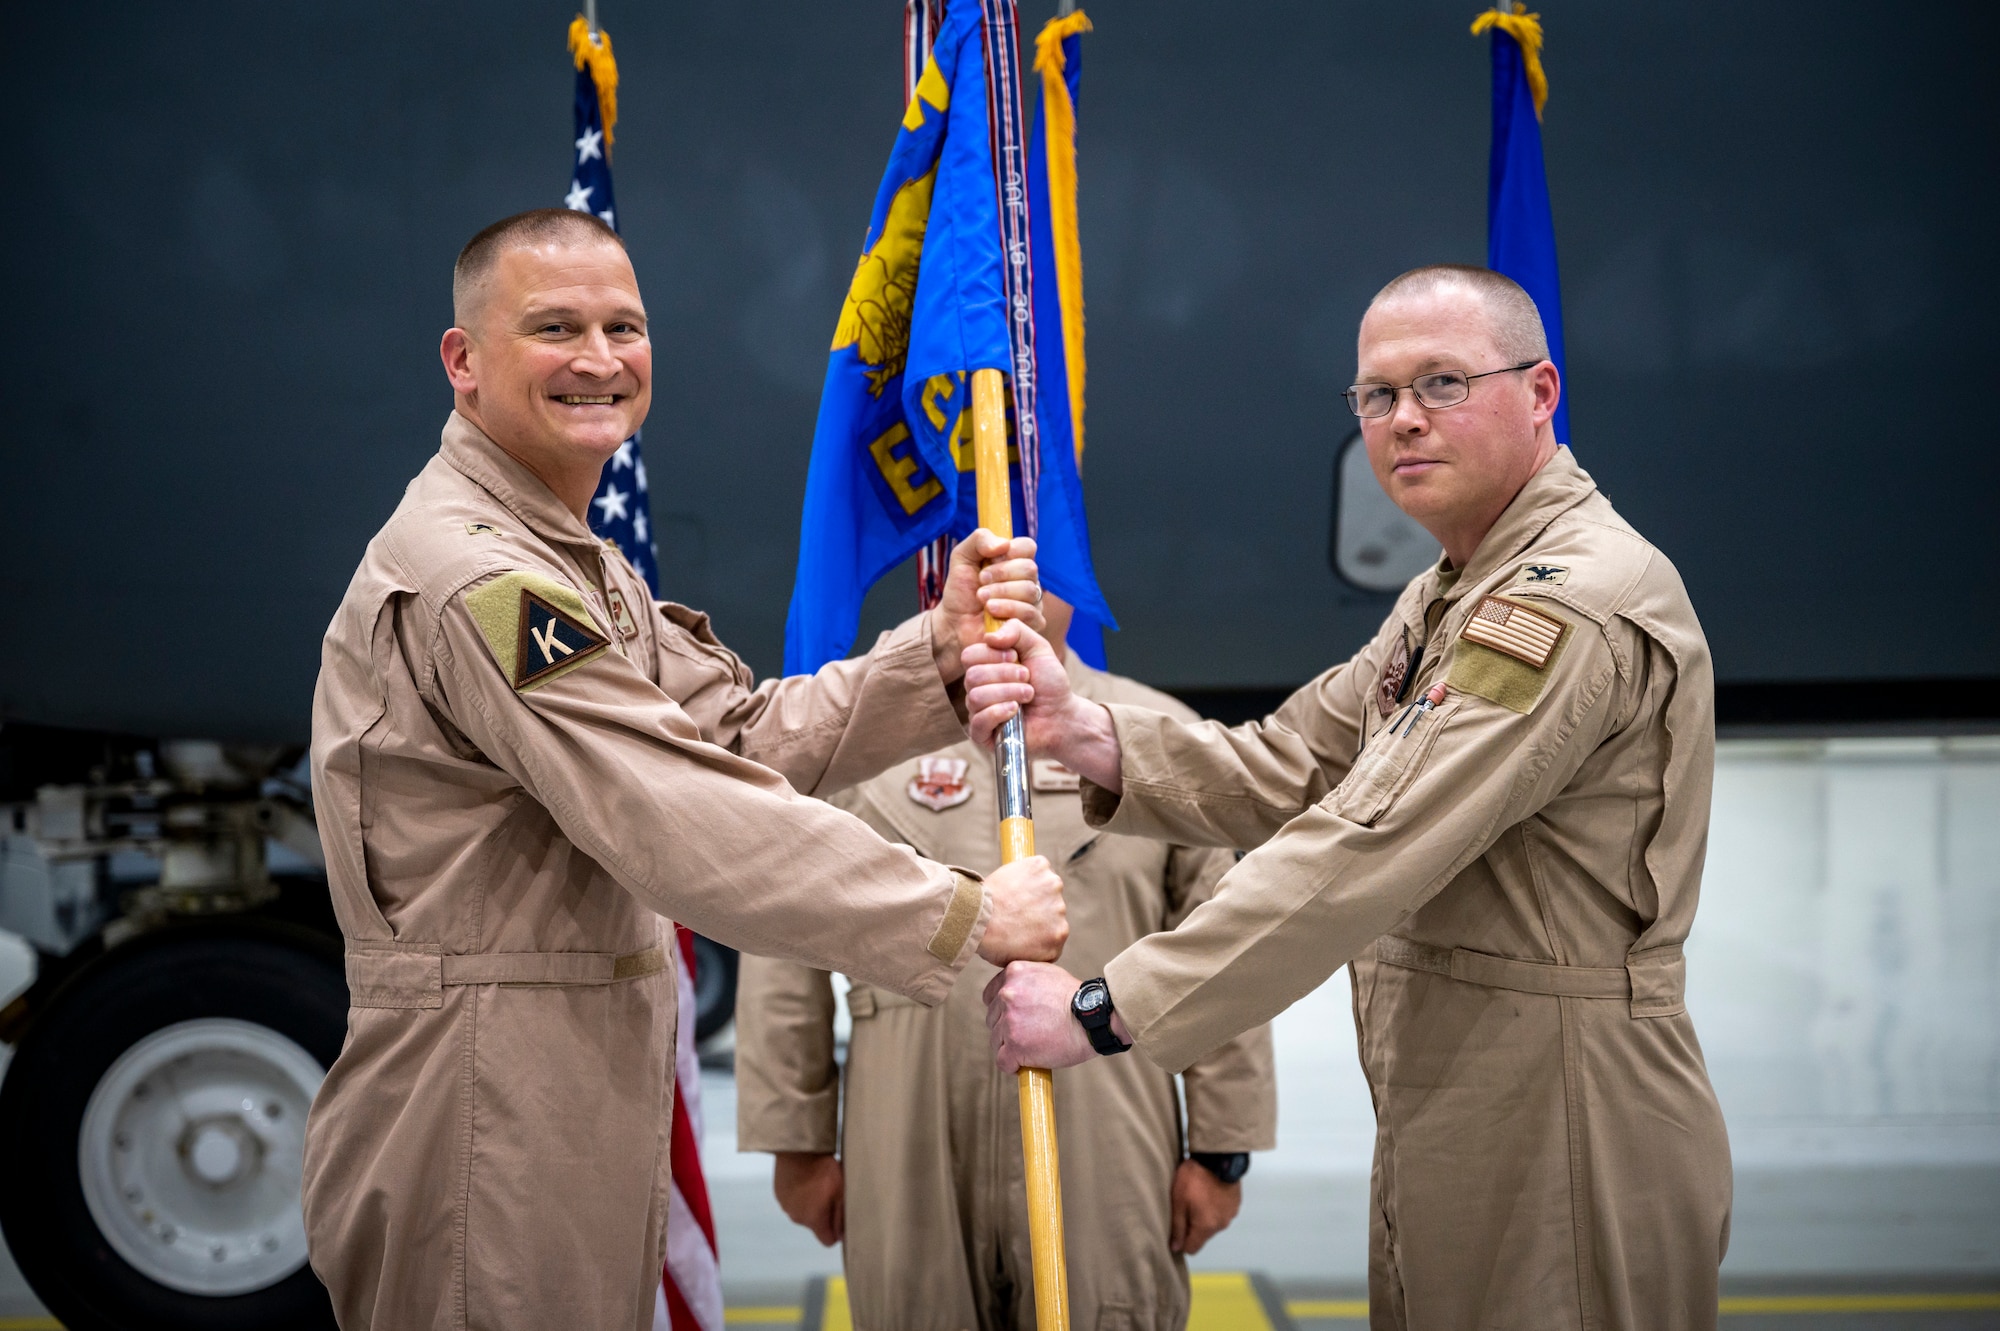 Military members pose for a photo while passing a flag to one another.